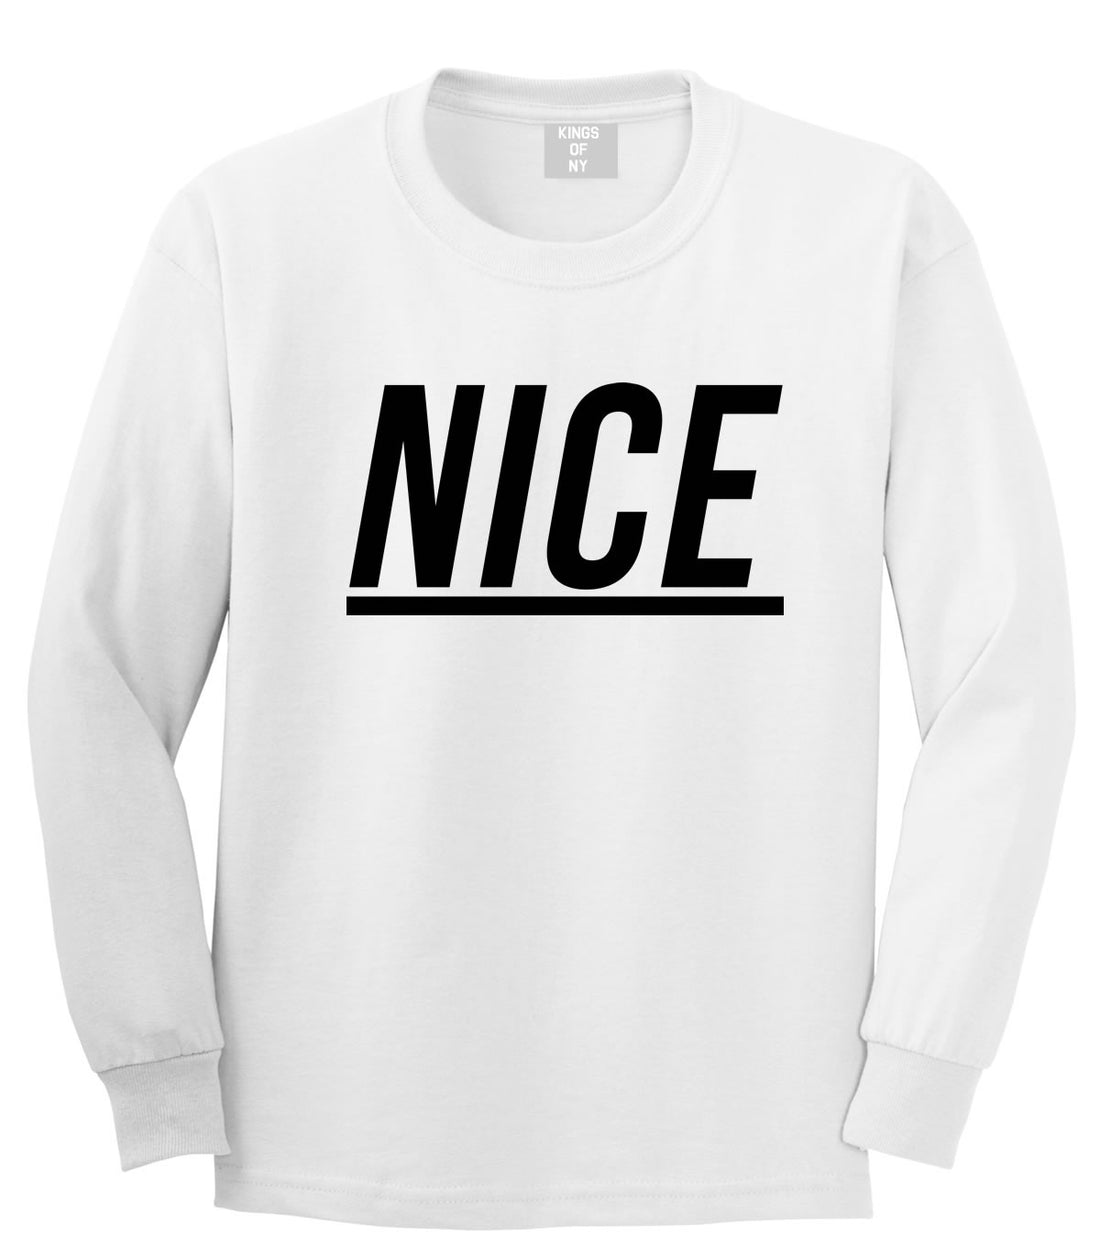 Nice Long Sleeve T-Shirt in White by Kings Of NY